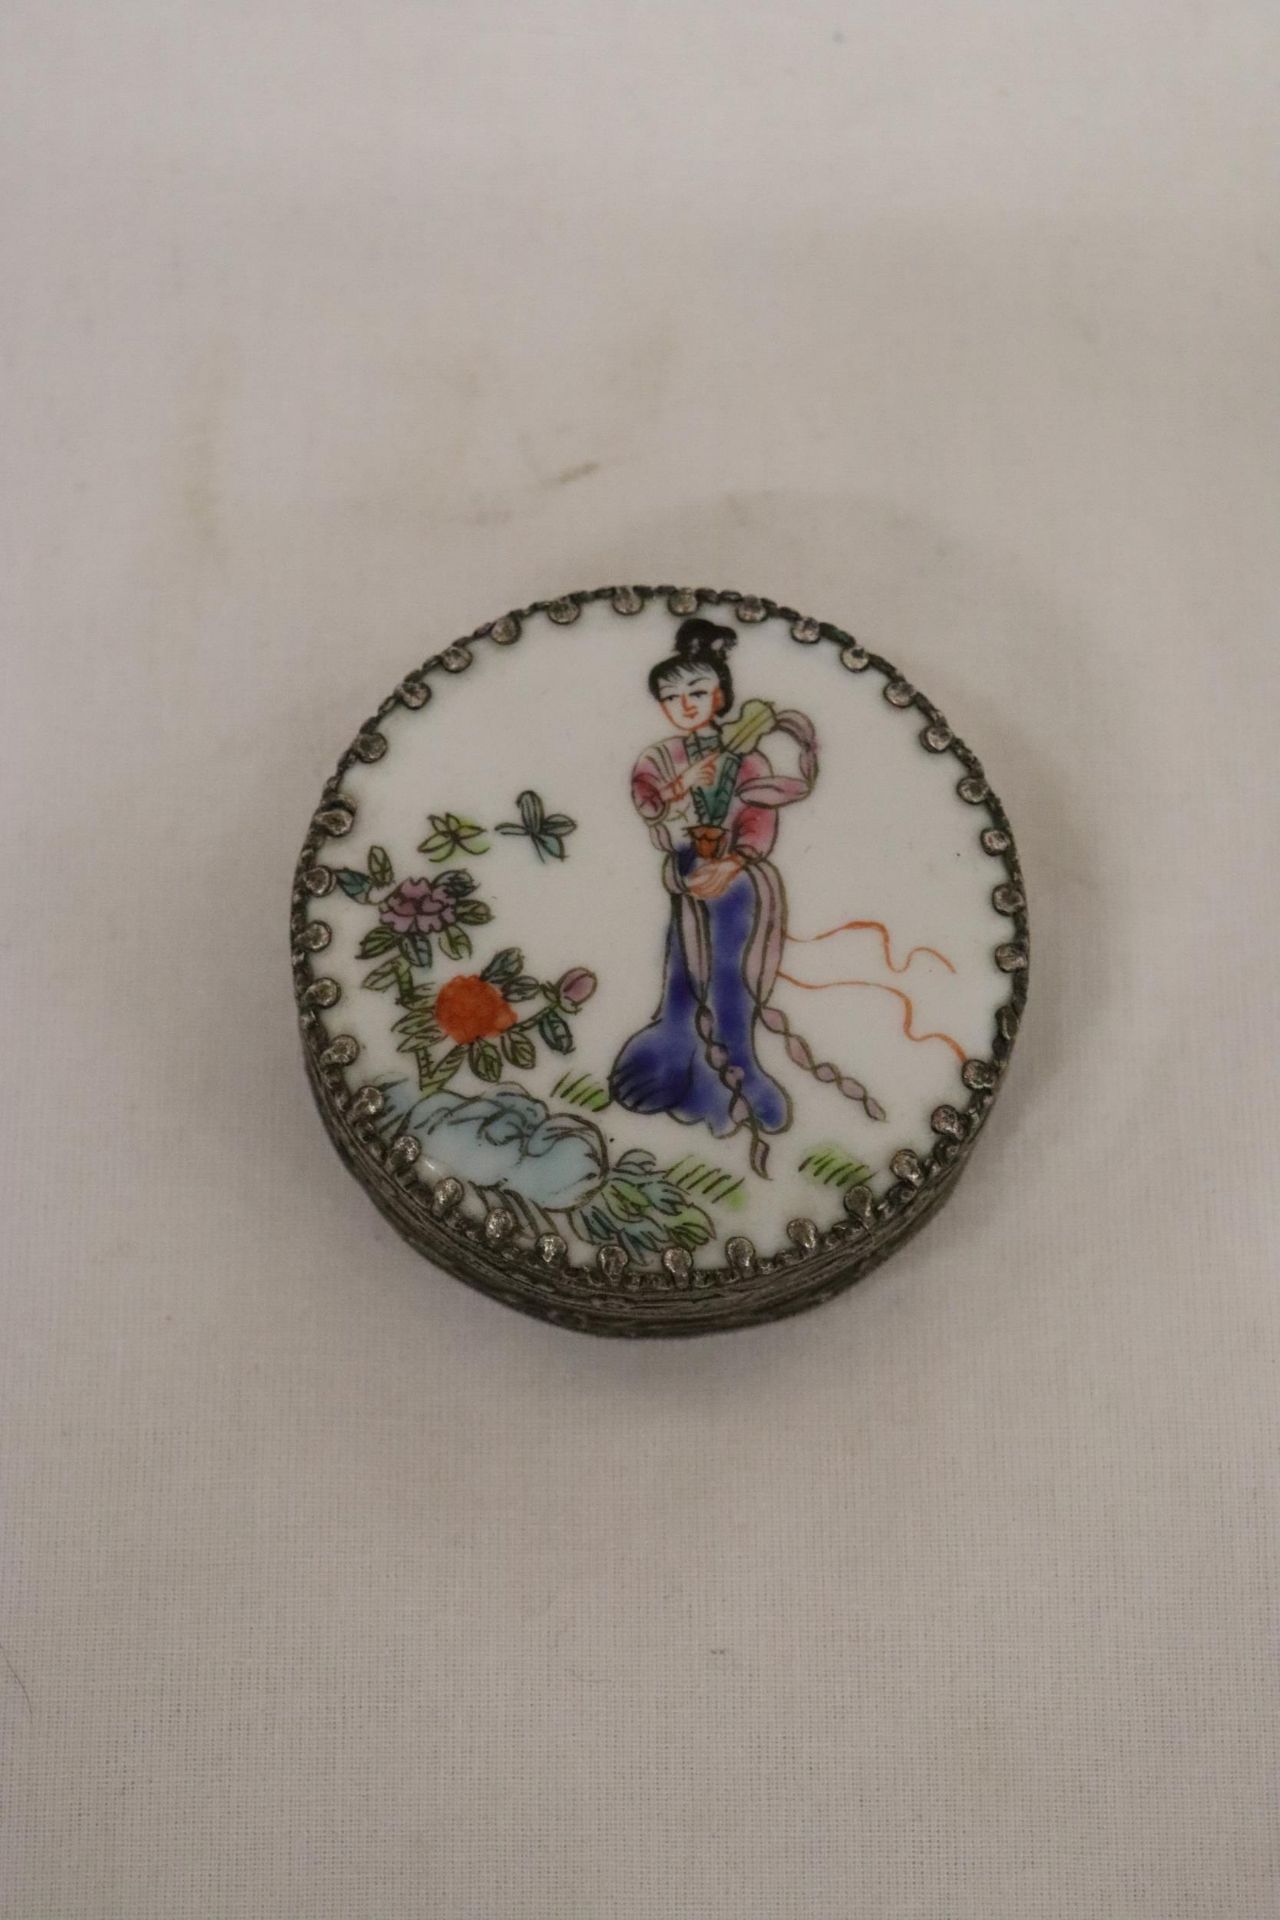 A VINTAGE SILVER TONE TRINKET BOX WITH THE IMAGE OF A JAPANESE LADY IN A FLORAL GARDEN